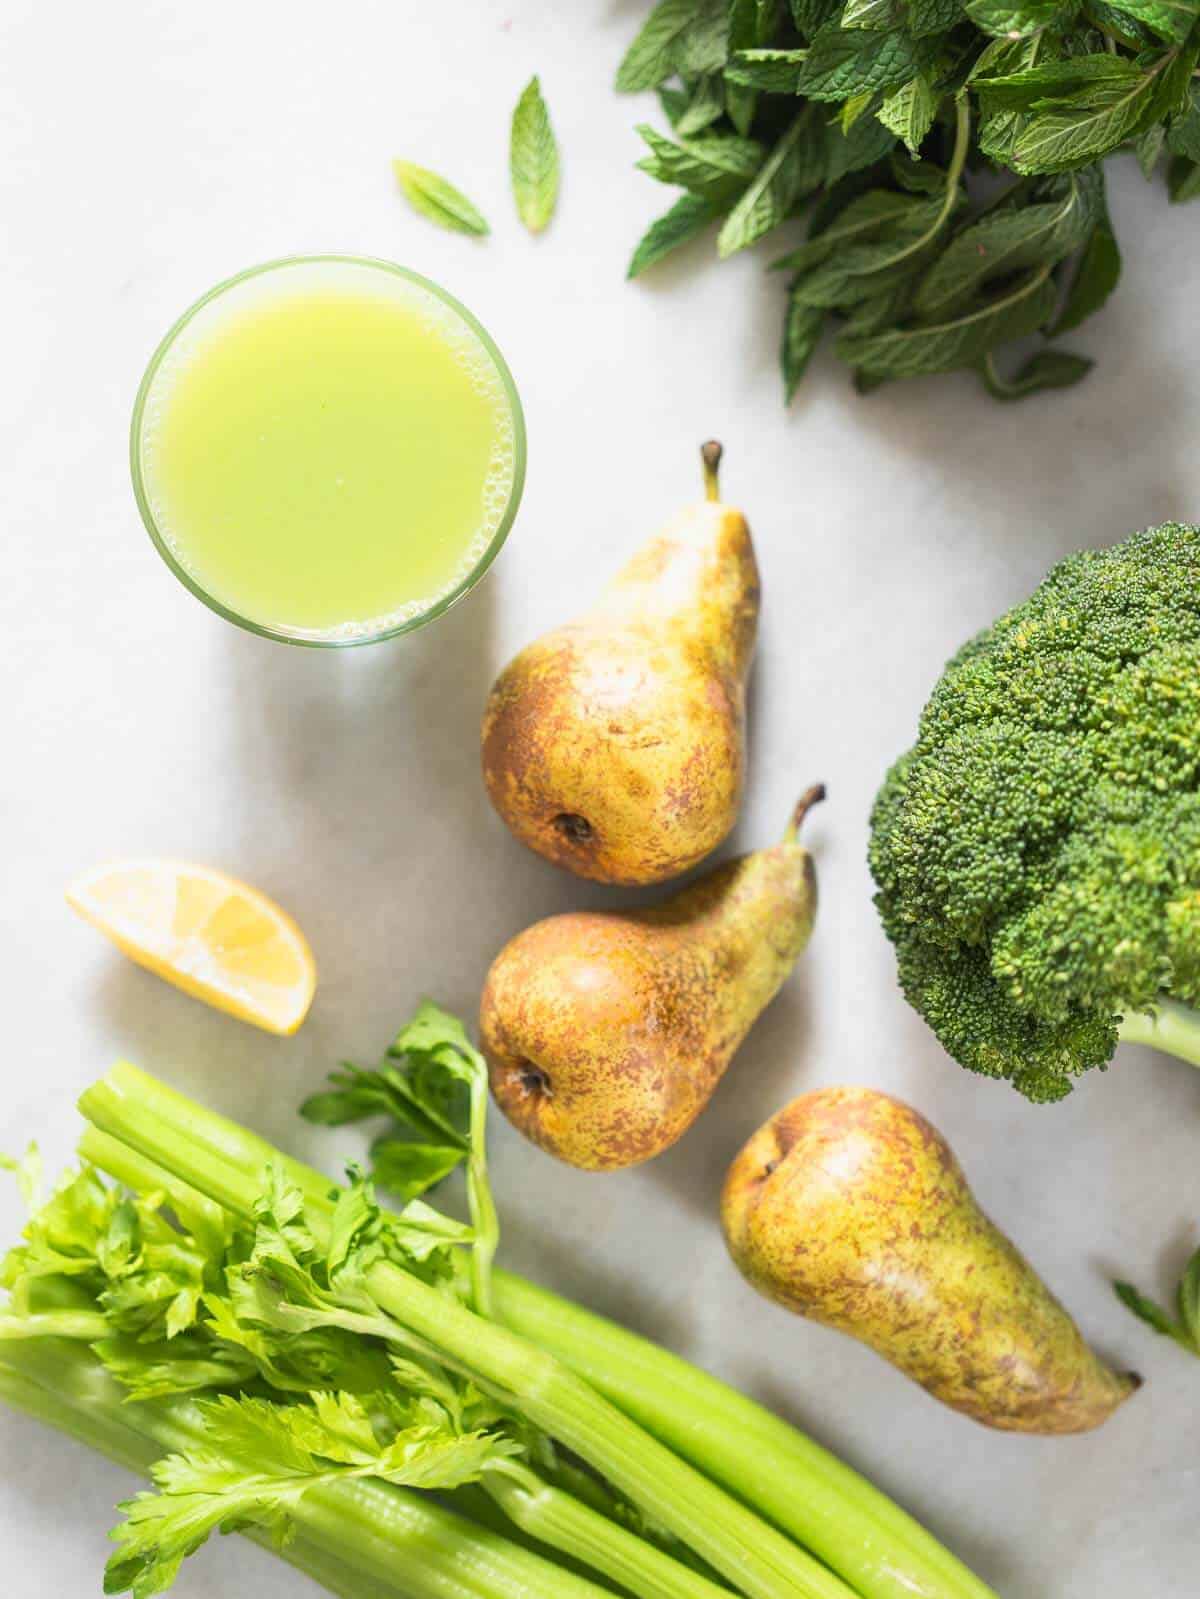 ingredients to make a juice with broccoli: pears, lemon, spearmint, and celery.